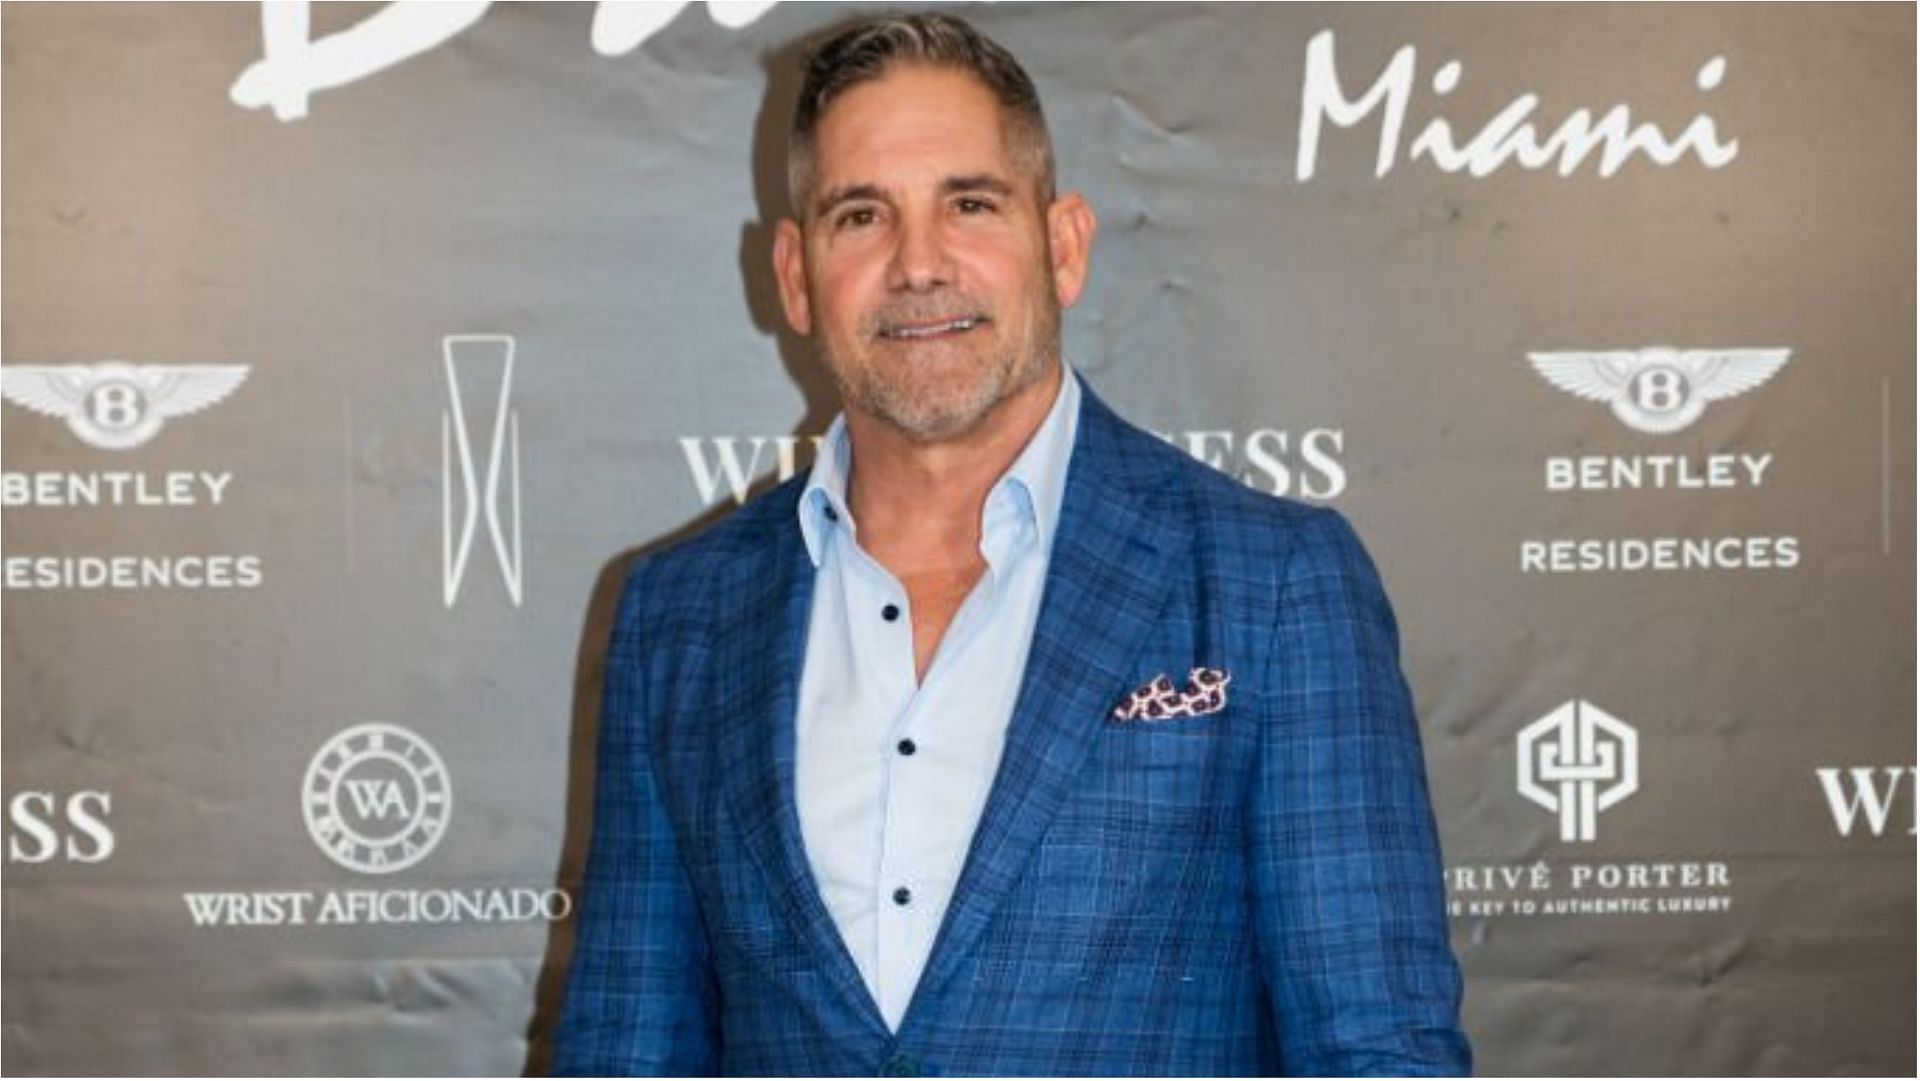 Grant Cardone is the owner of several companies which helped him to earn a lot of wealth (Image via Romain Maurice/Getty Images)